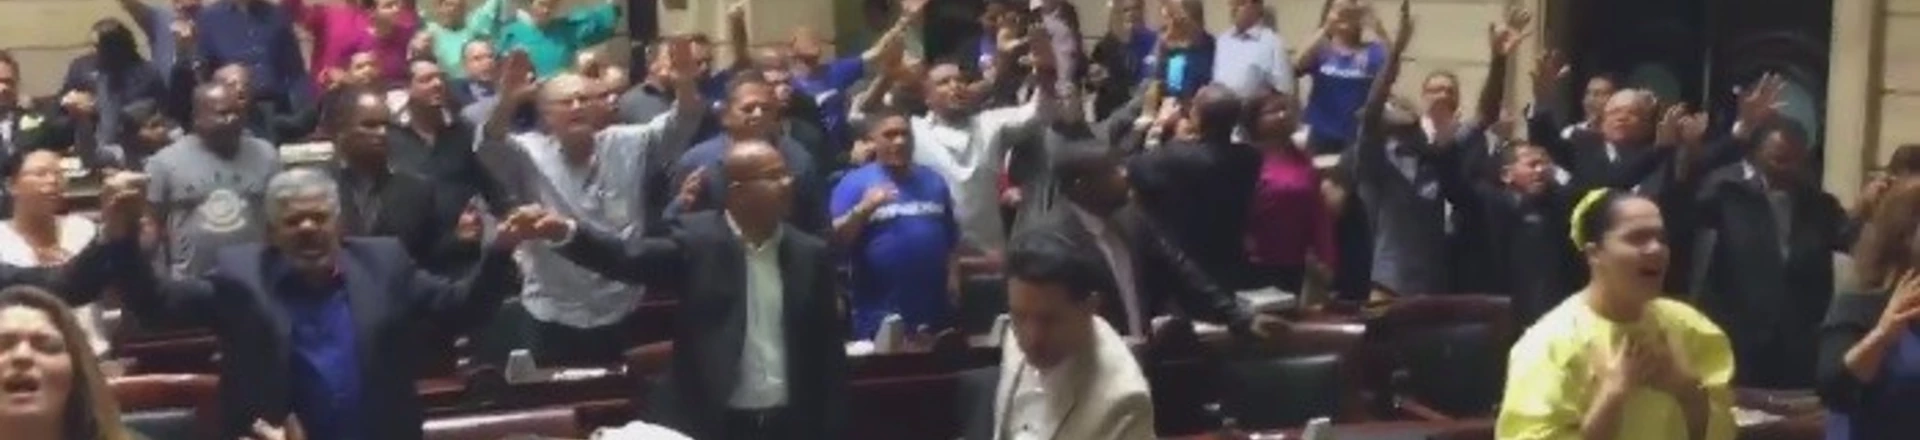 An evangelical prayer service was held in the chambers of the Rio de Janeiro City Council on September 29, led by a bishop of the Universal Church of the Kingdom of God who is also an elected city council member.